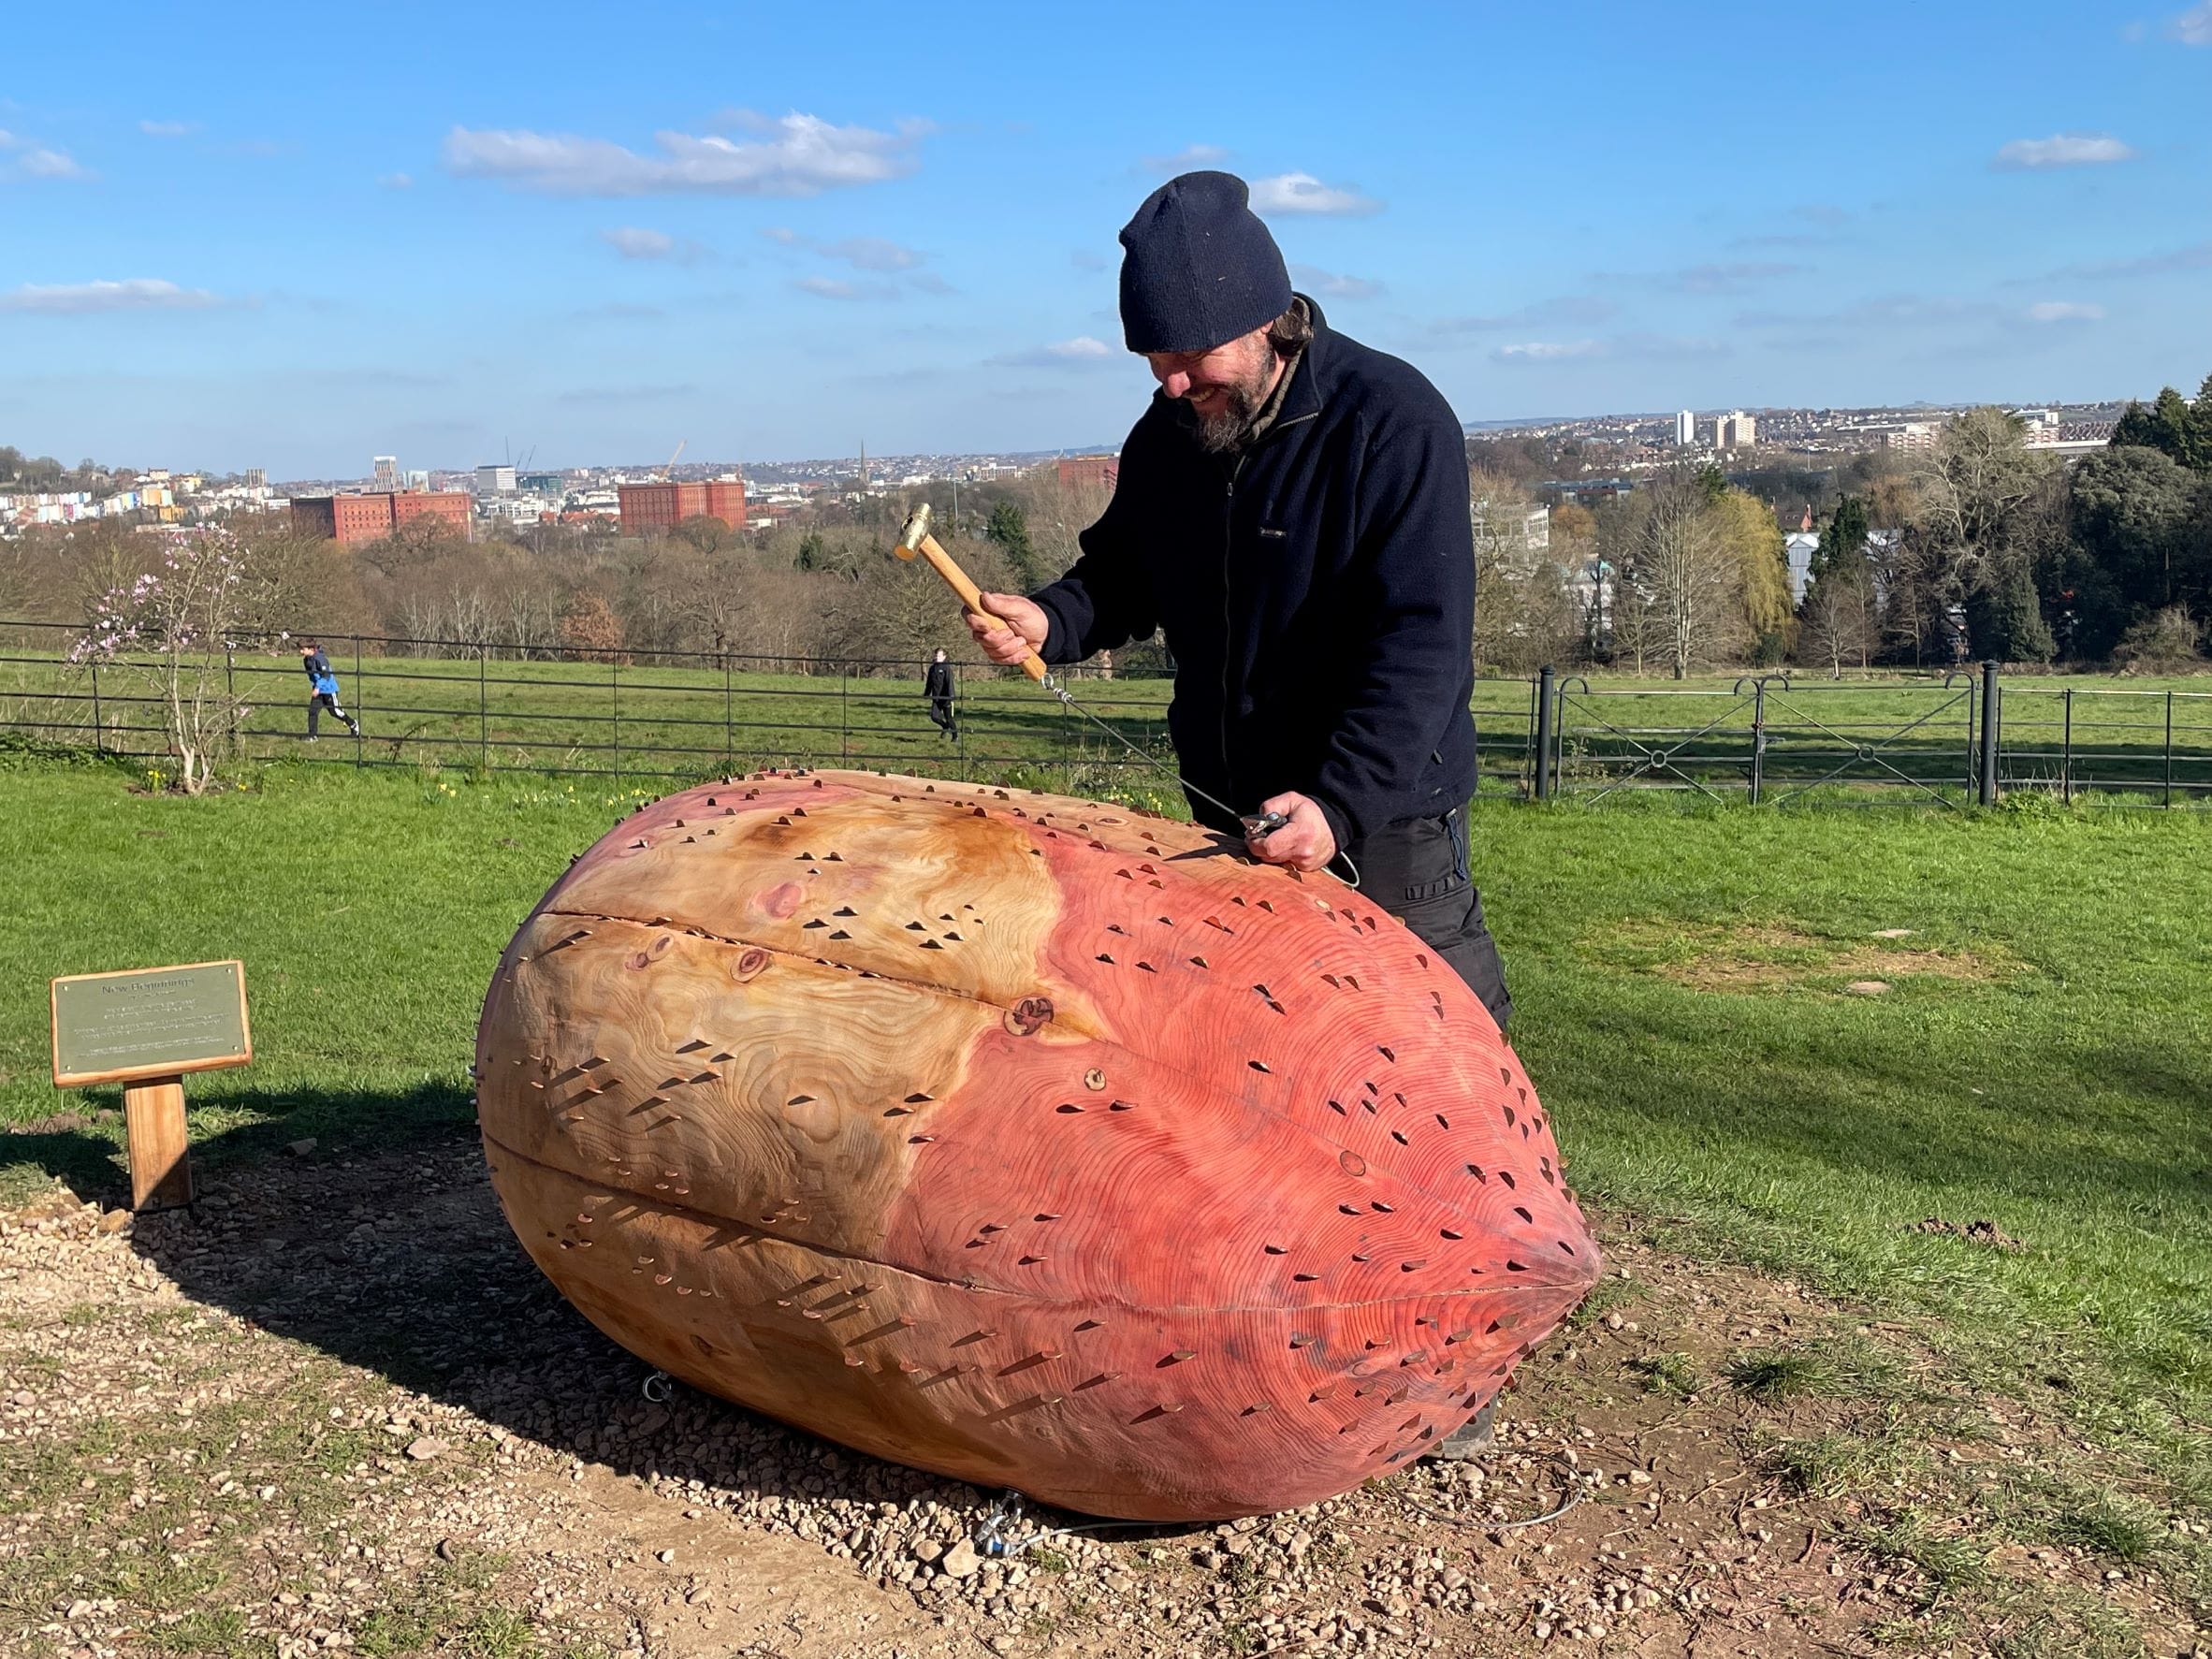 A man is wearing a black hat and jumper. He is holding a hammer. He is hammering a coin into a sculpture made of a wood of a giant seed. Behind him is green grass and blue skies with some floating clouds.